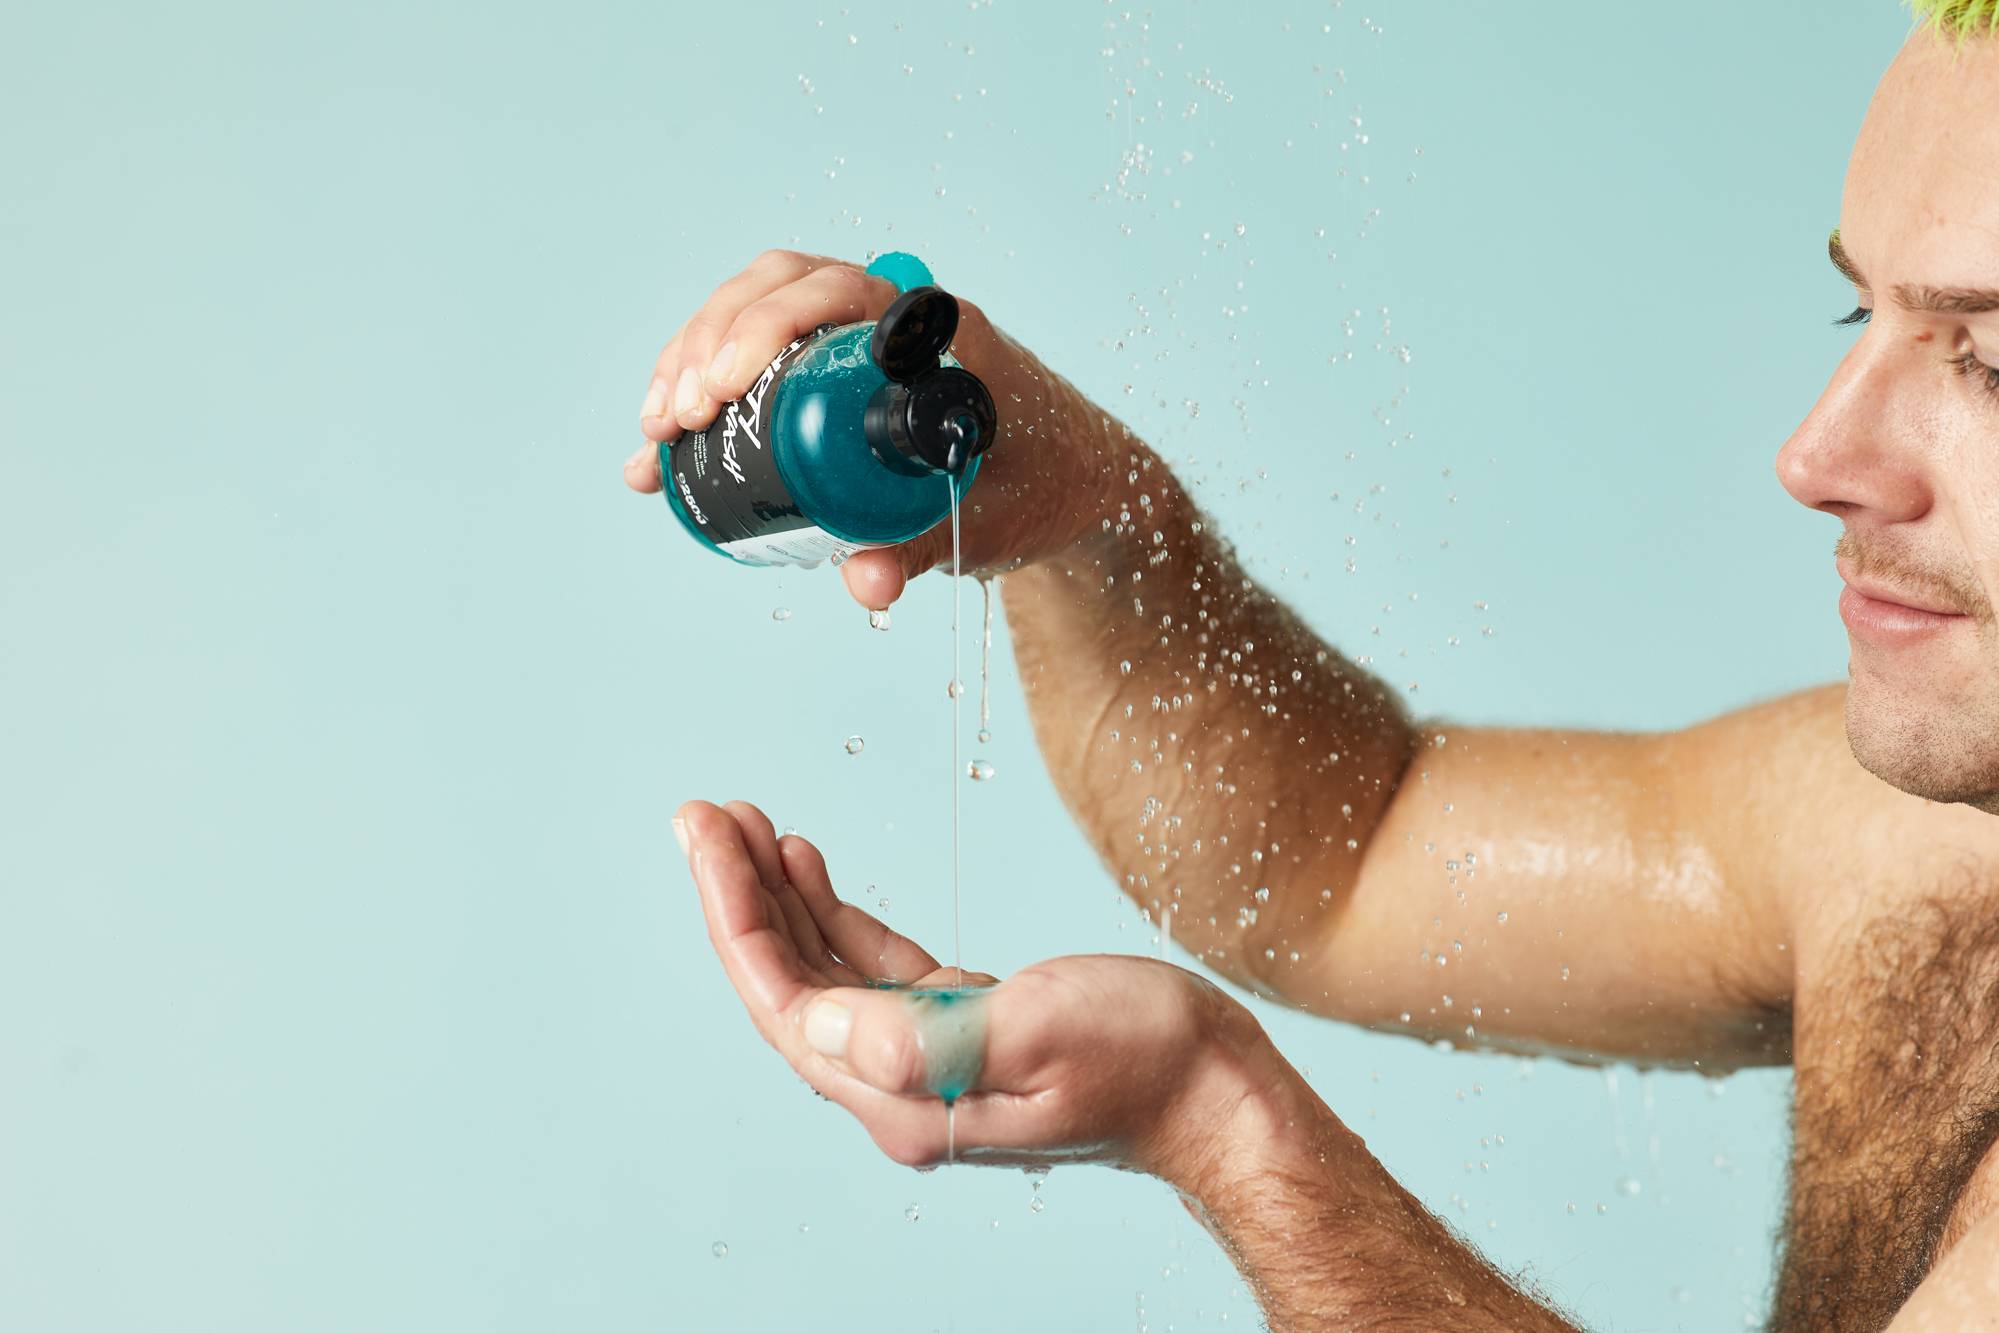 A person pours blue Dirty Spirngwash shower gel into their hand as water droplets fall.